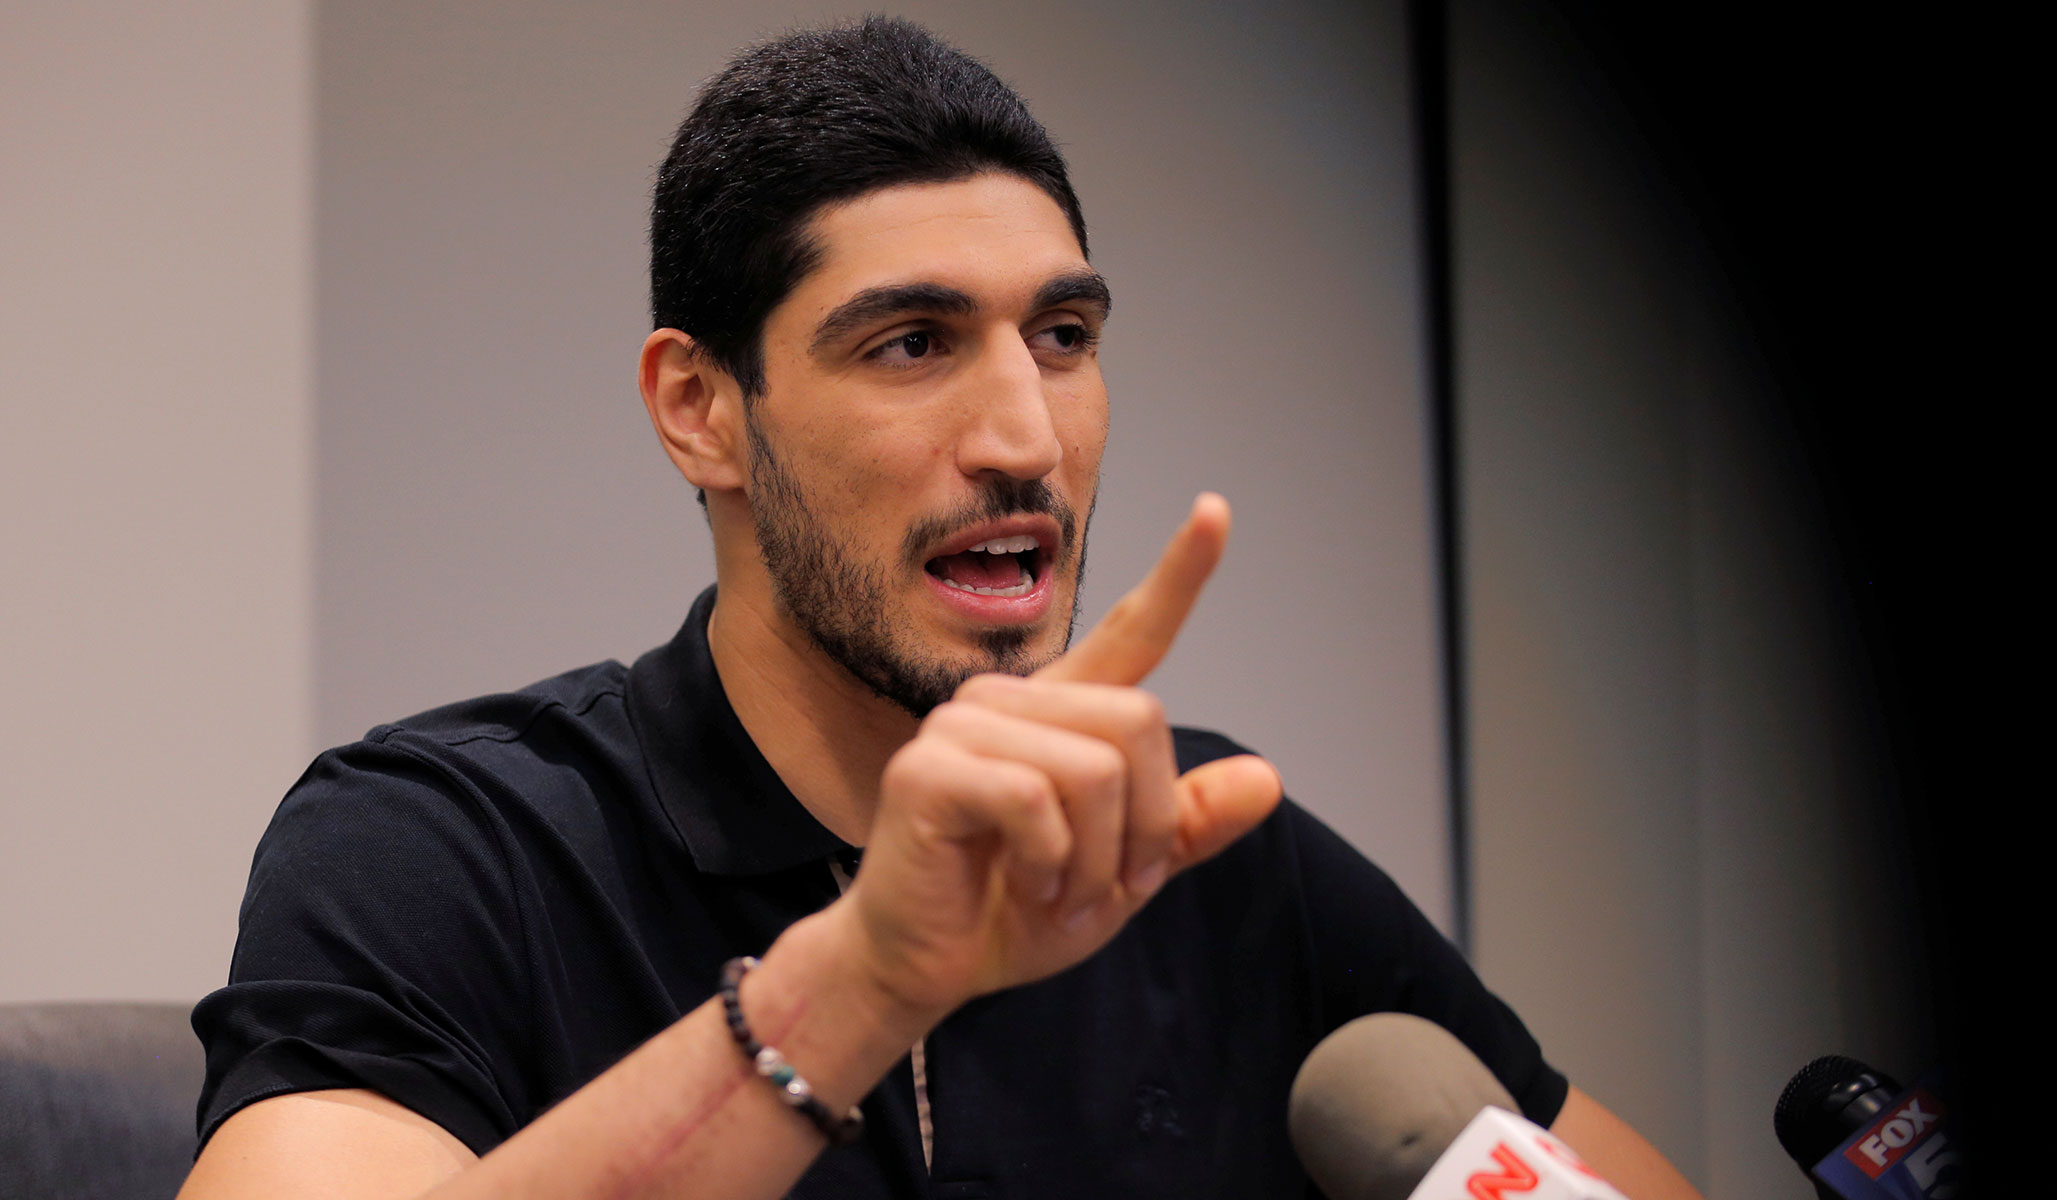 Enes Kanter Freedom Calls Out Biden for Treating World Dictators with Kid Gloves: ‘Very Soft’ | National Review